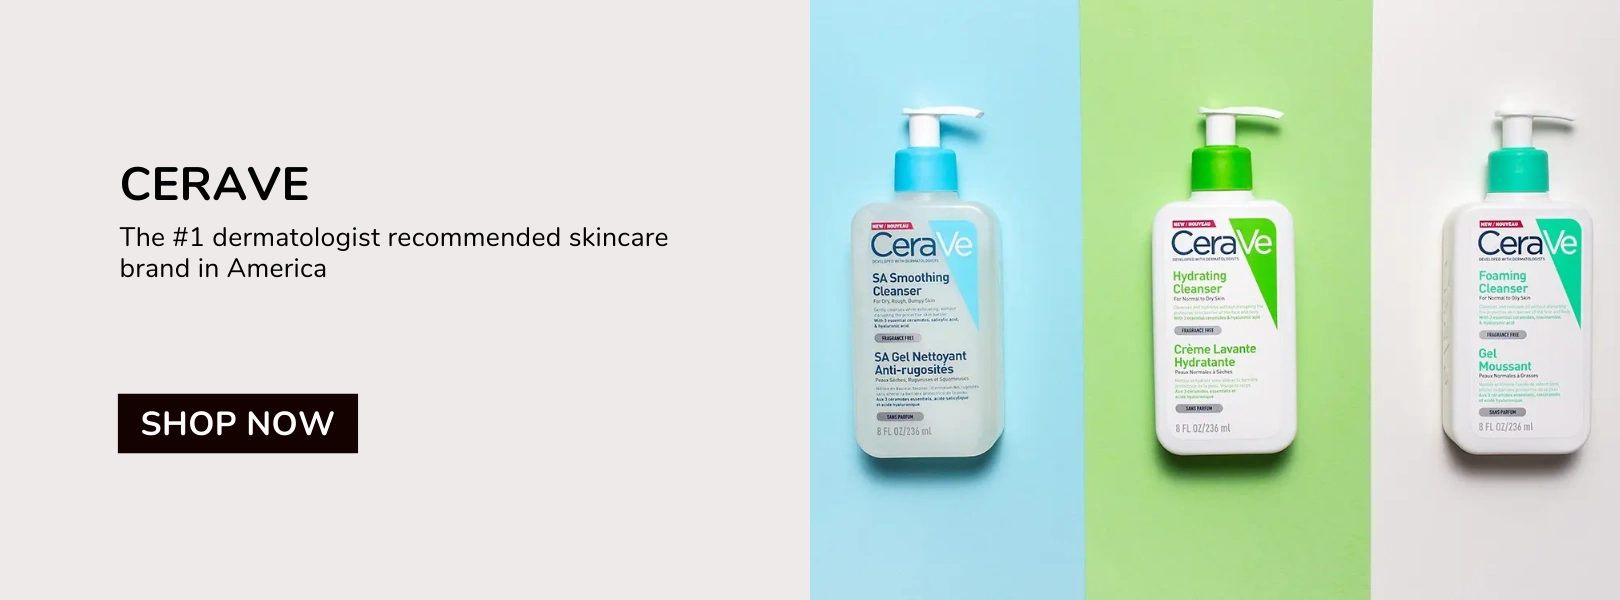 CeraVe - The #1 dermatologist recommended skincare brand in America.